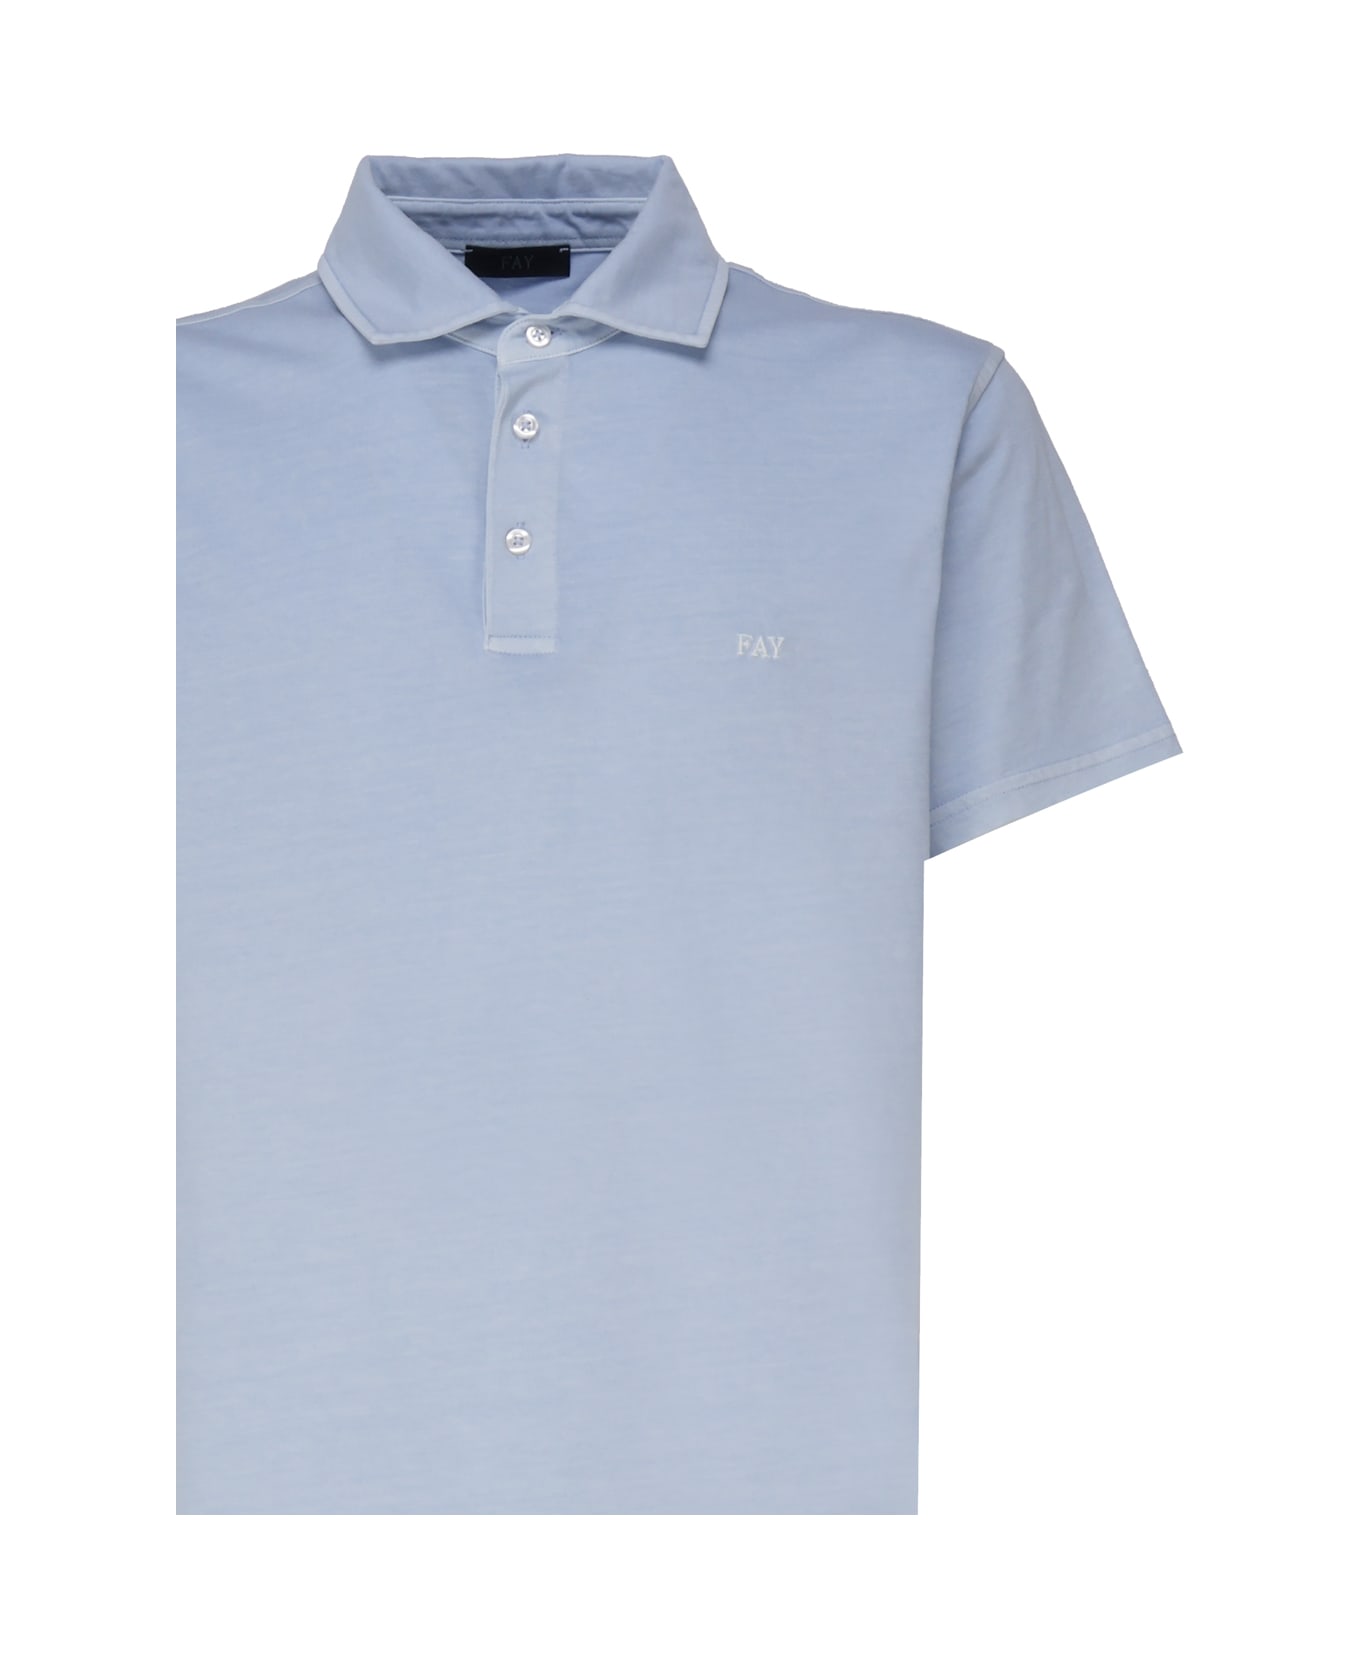 Fay Polo T-shirt In Cotton - Light blue